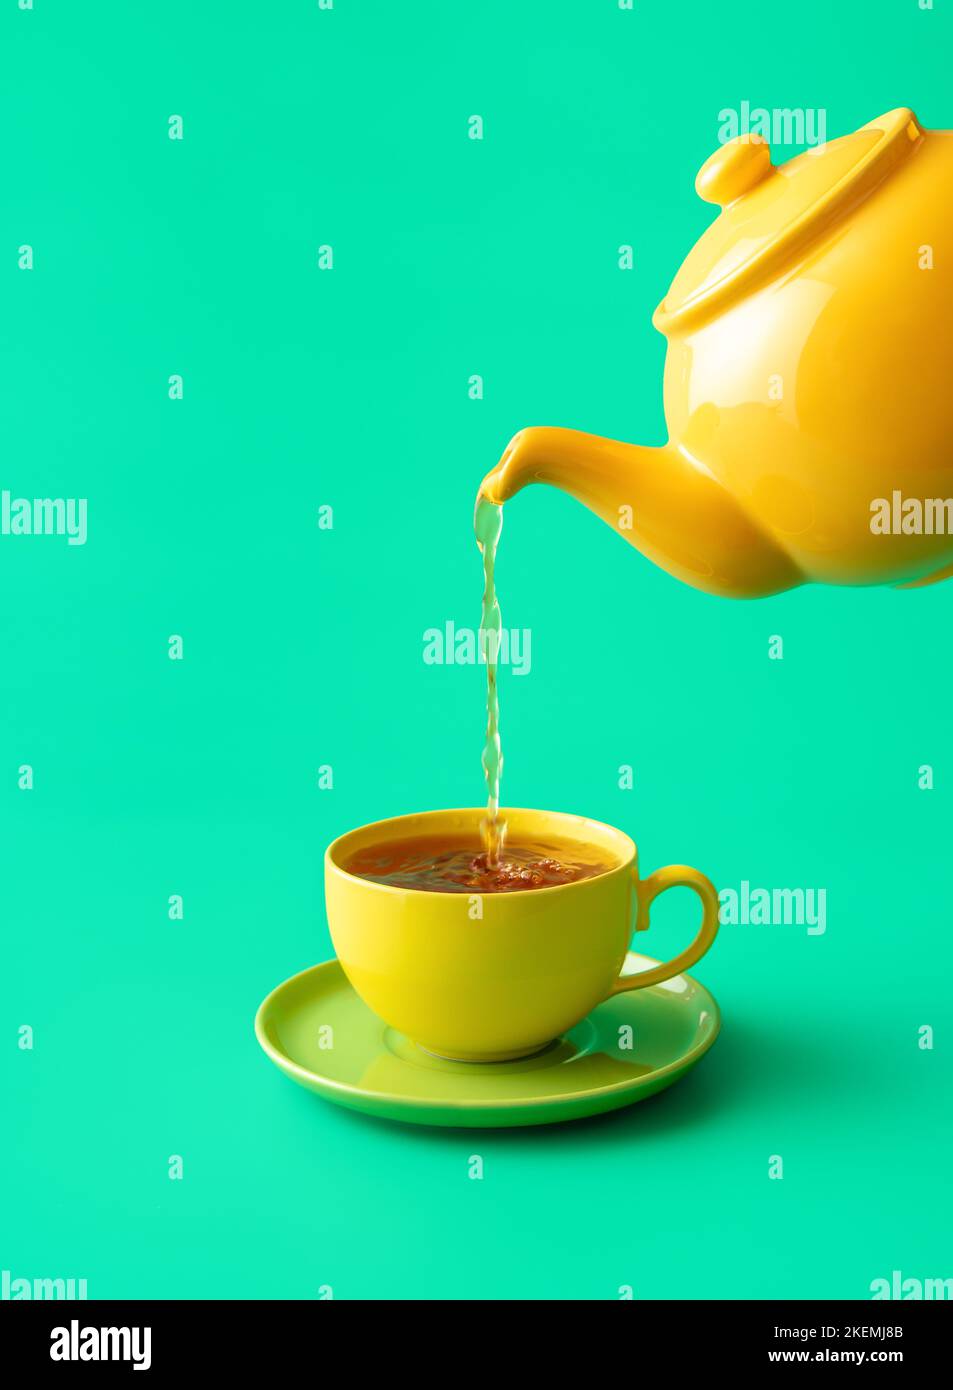 Pouring tea from a ceramic teapot in a cup, minimalist on a green table. Hot mint tea in a yellow colored cup isolated on a green background Stock Photo